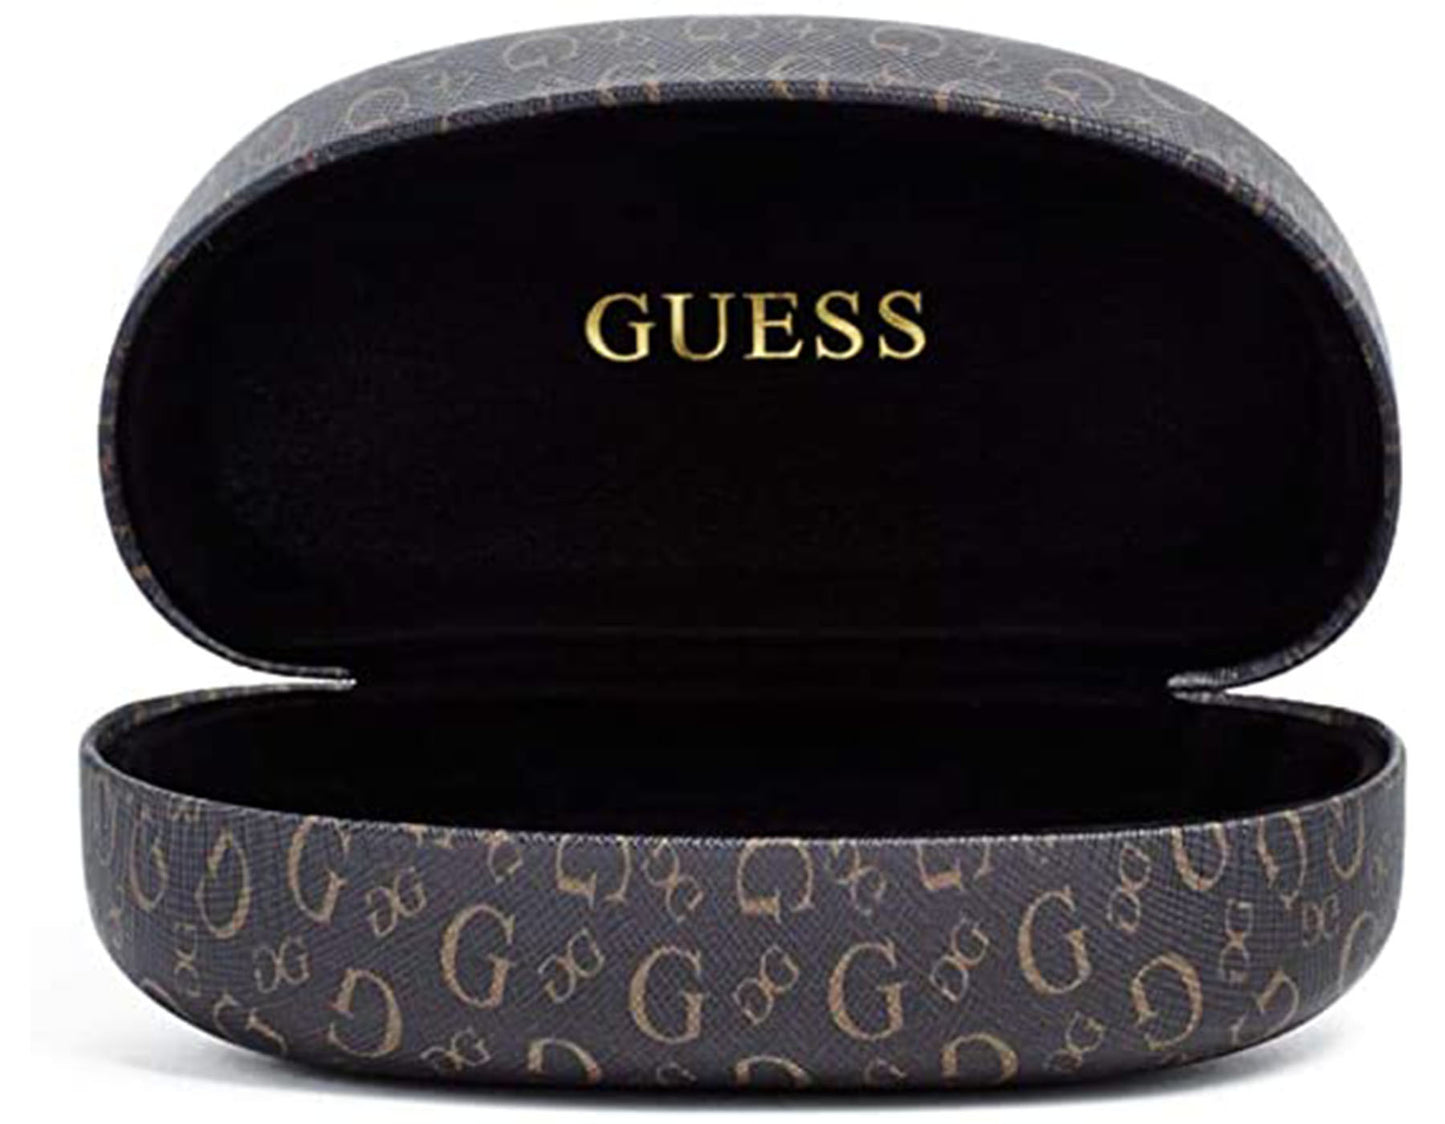 Guess By Marciano 174-PUR53 53mm New Eyeglasses